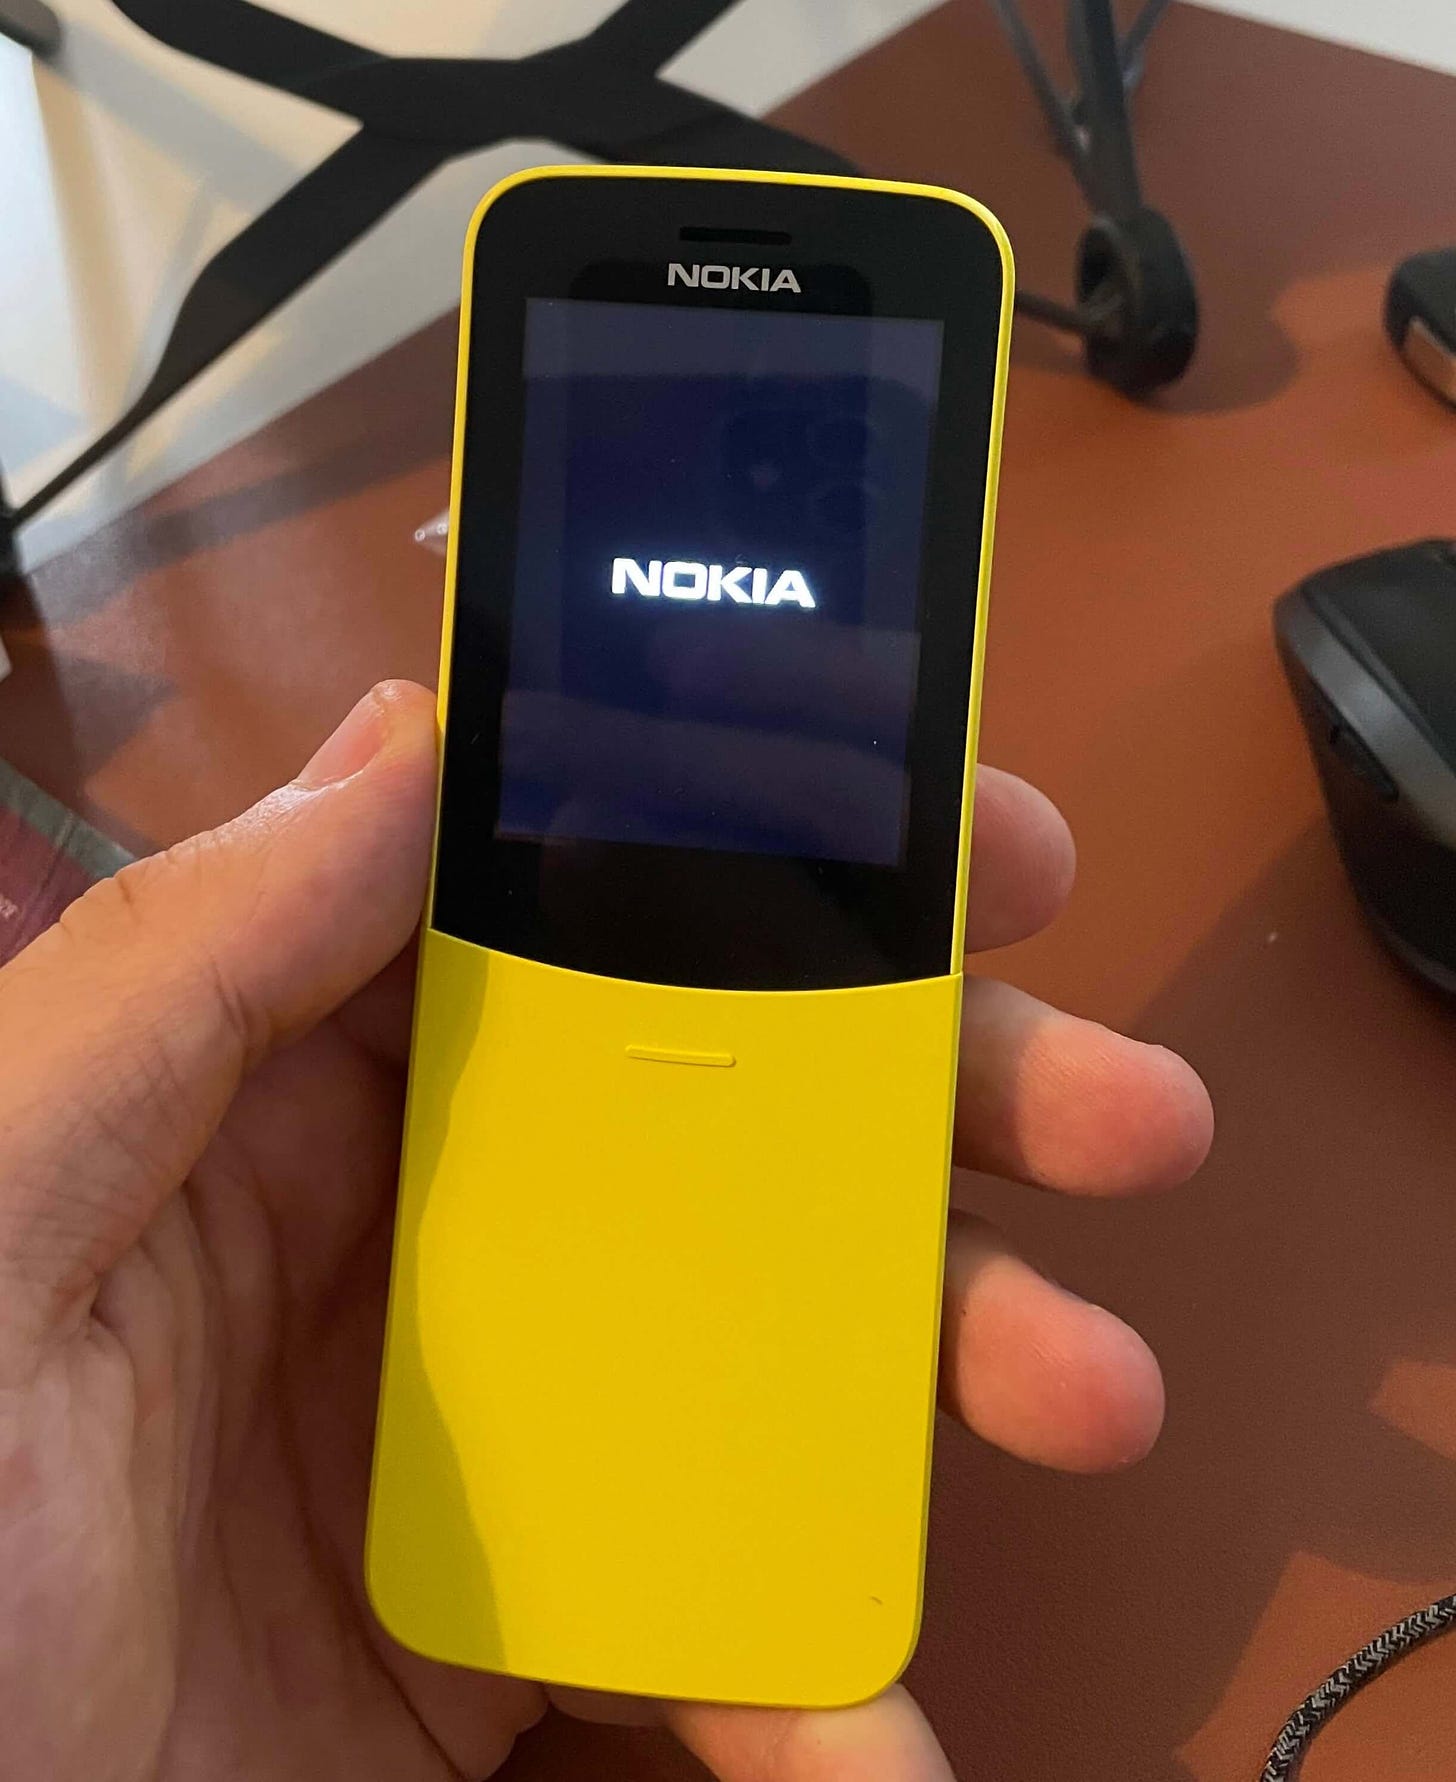 A yellow nokia mobile phone with a curved shape